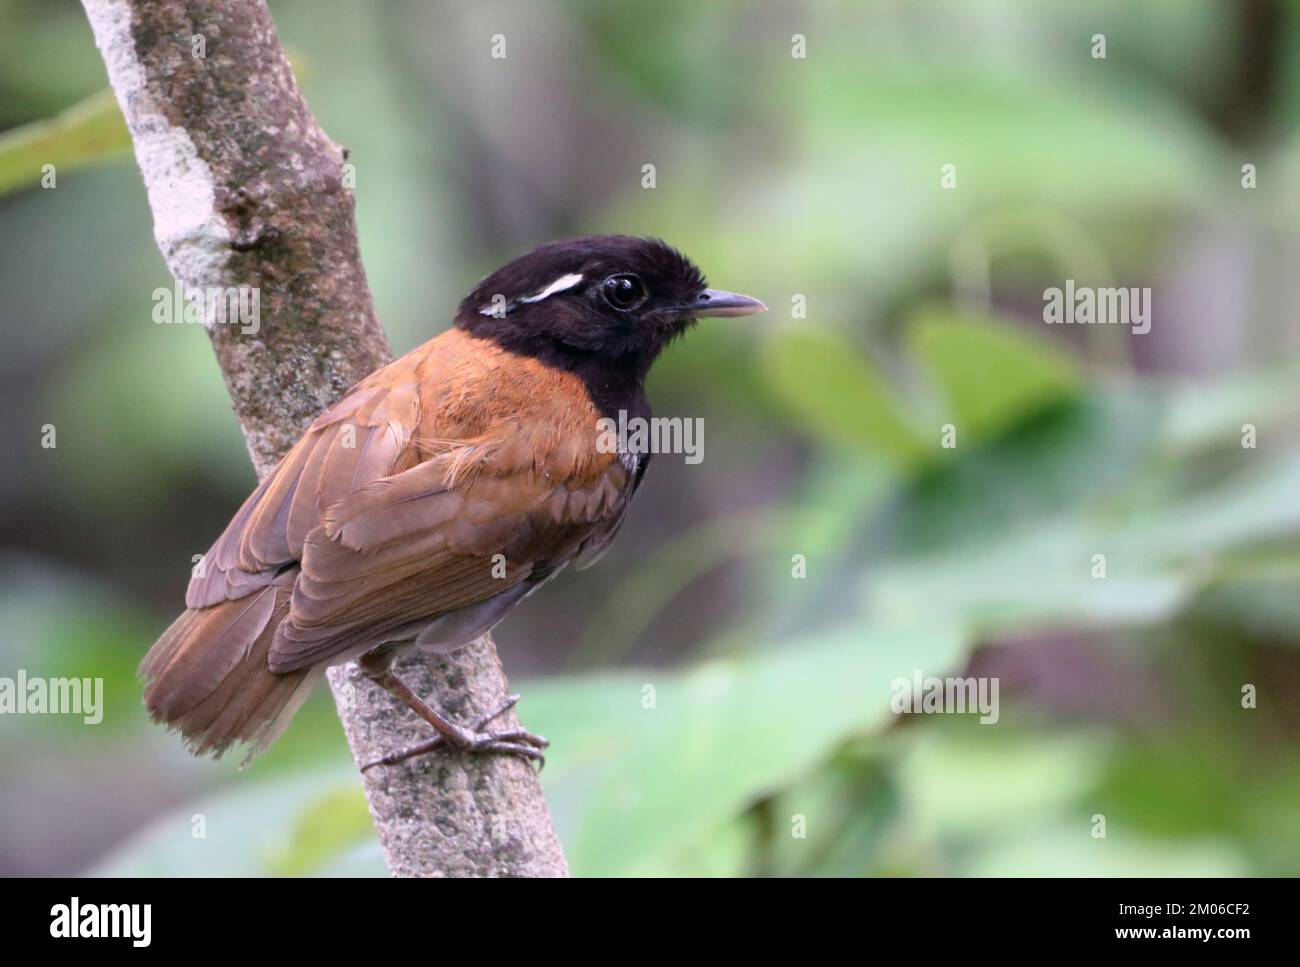 Male Hooded Gnateater (Conopophaga roberti) perched on a log Stock Photo